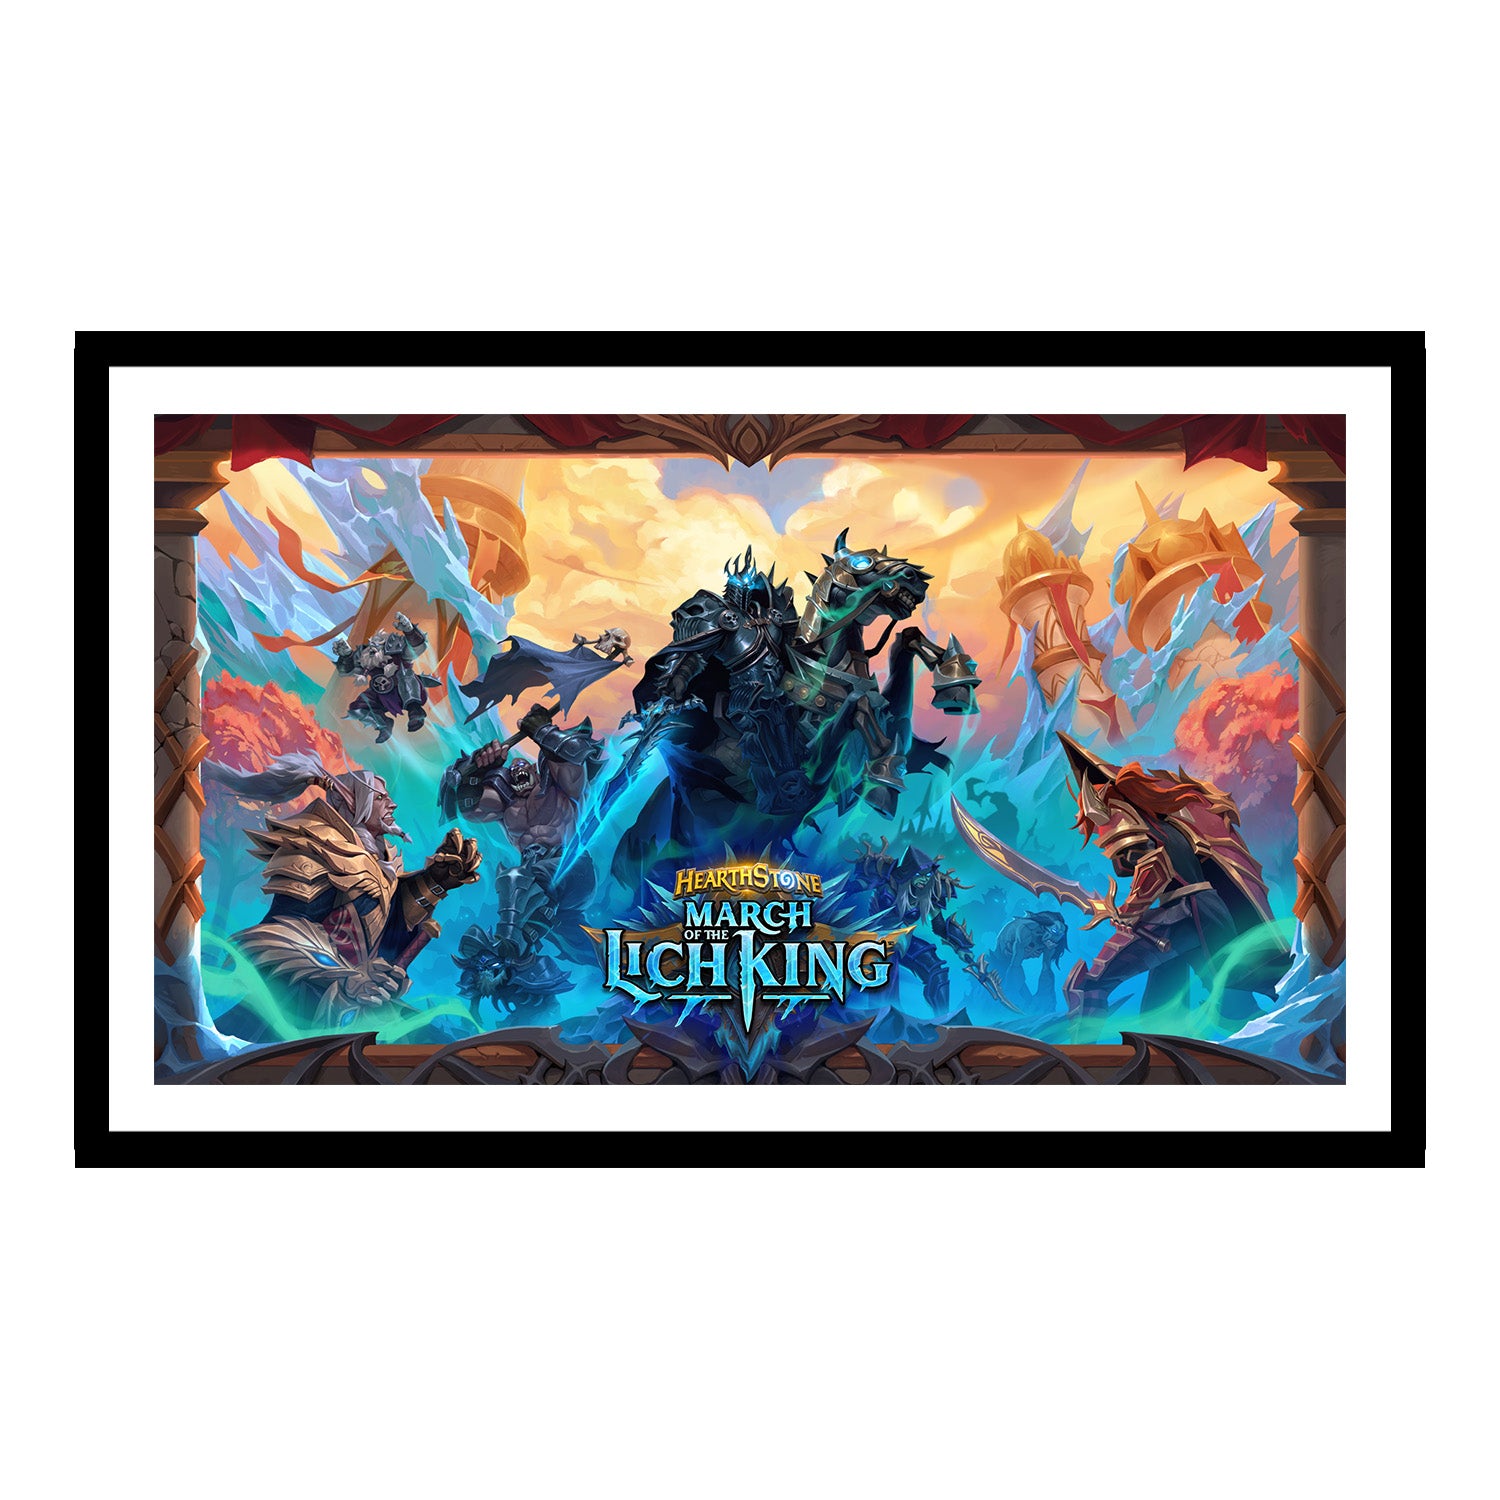 Hearthstone March of the Lich King 30.5 x 43.4 cm Framed Art Print - Front View